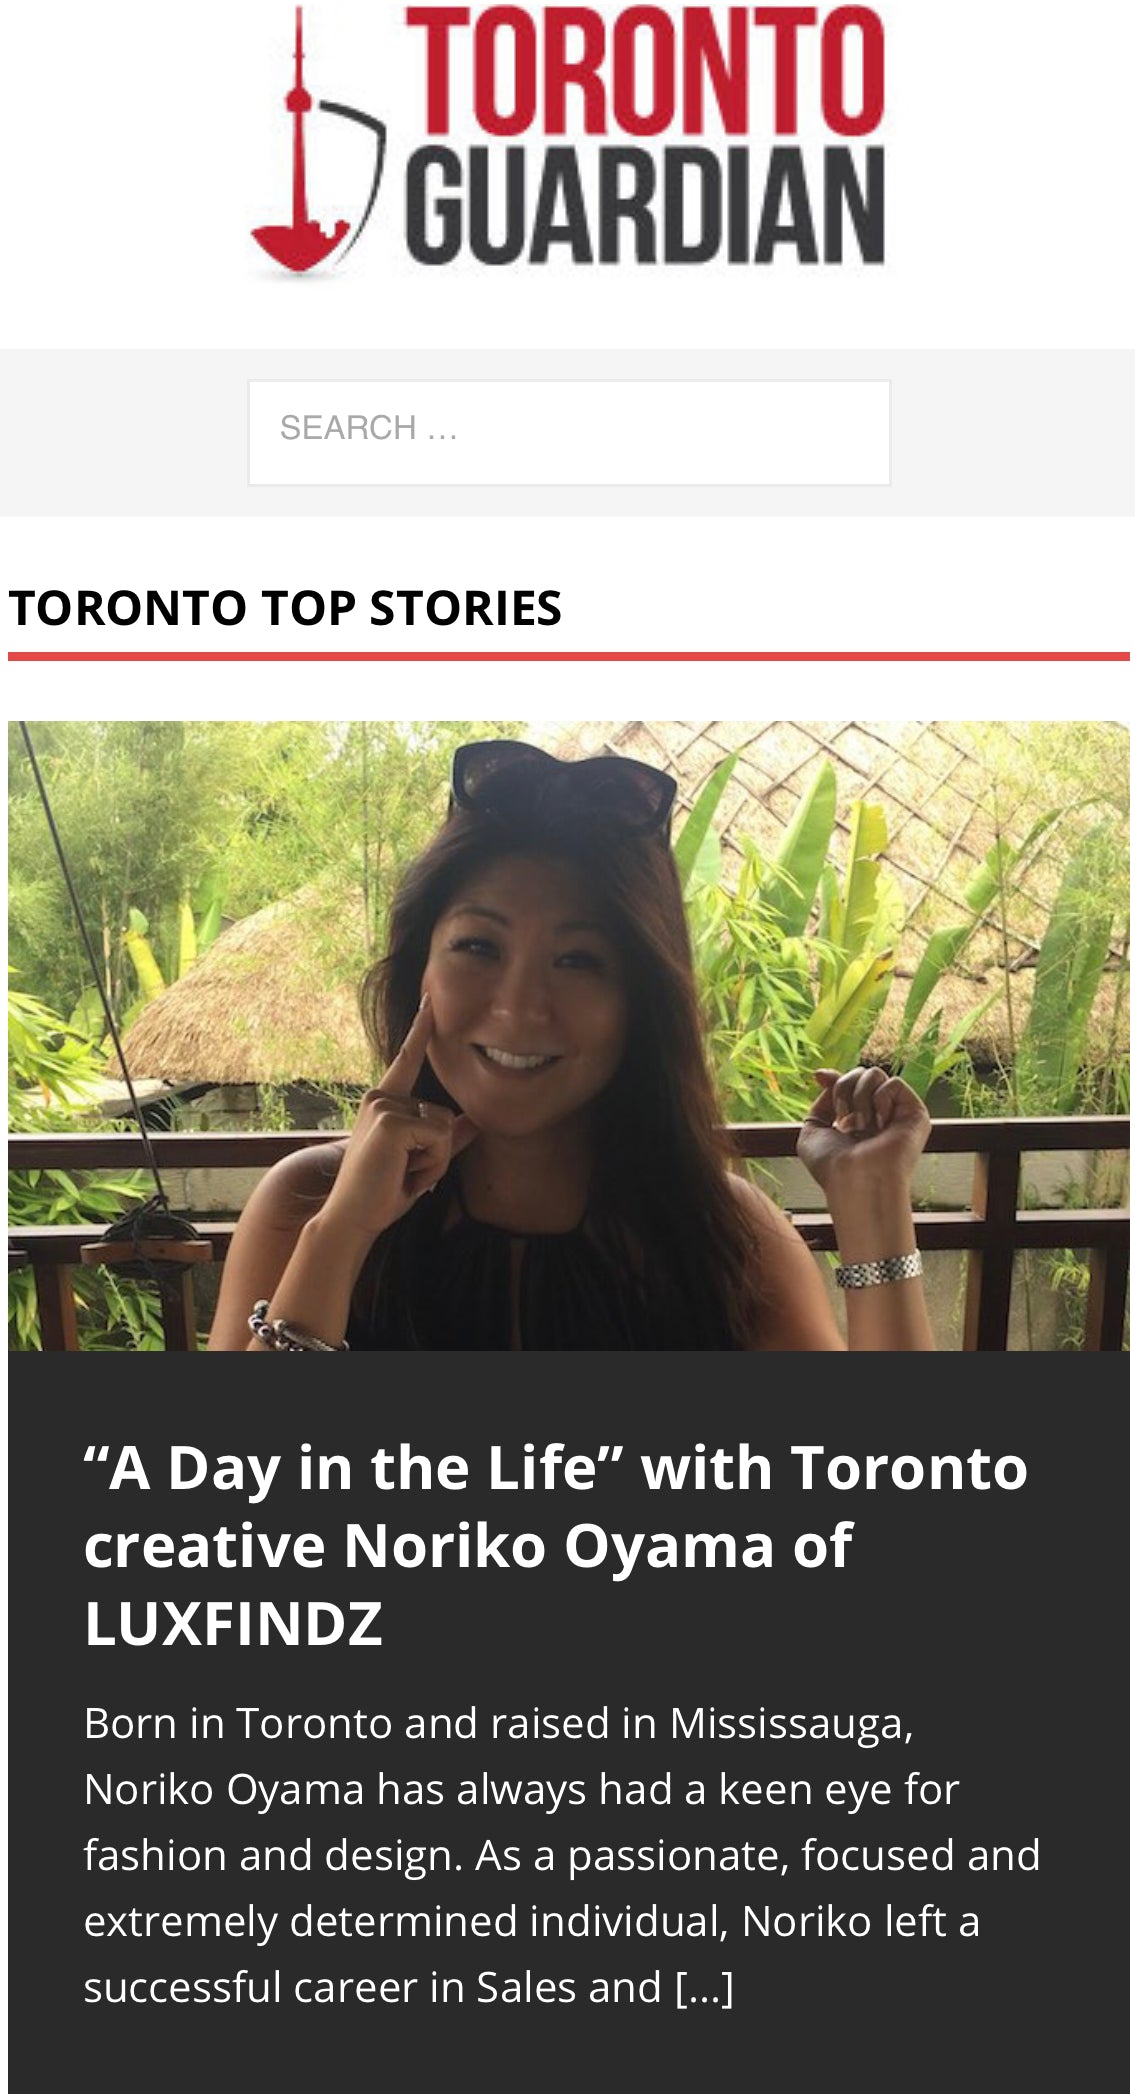 Toronto Guardian’s Day in the Life Publication